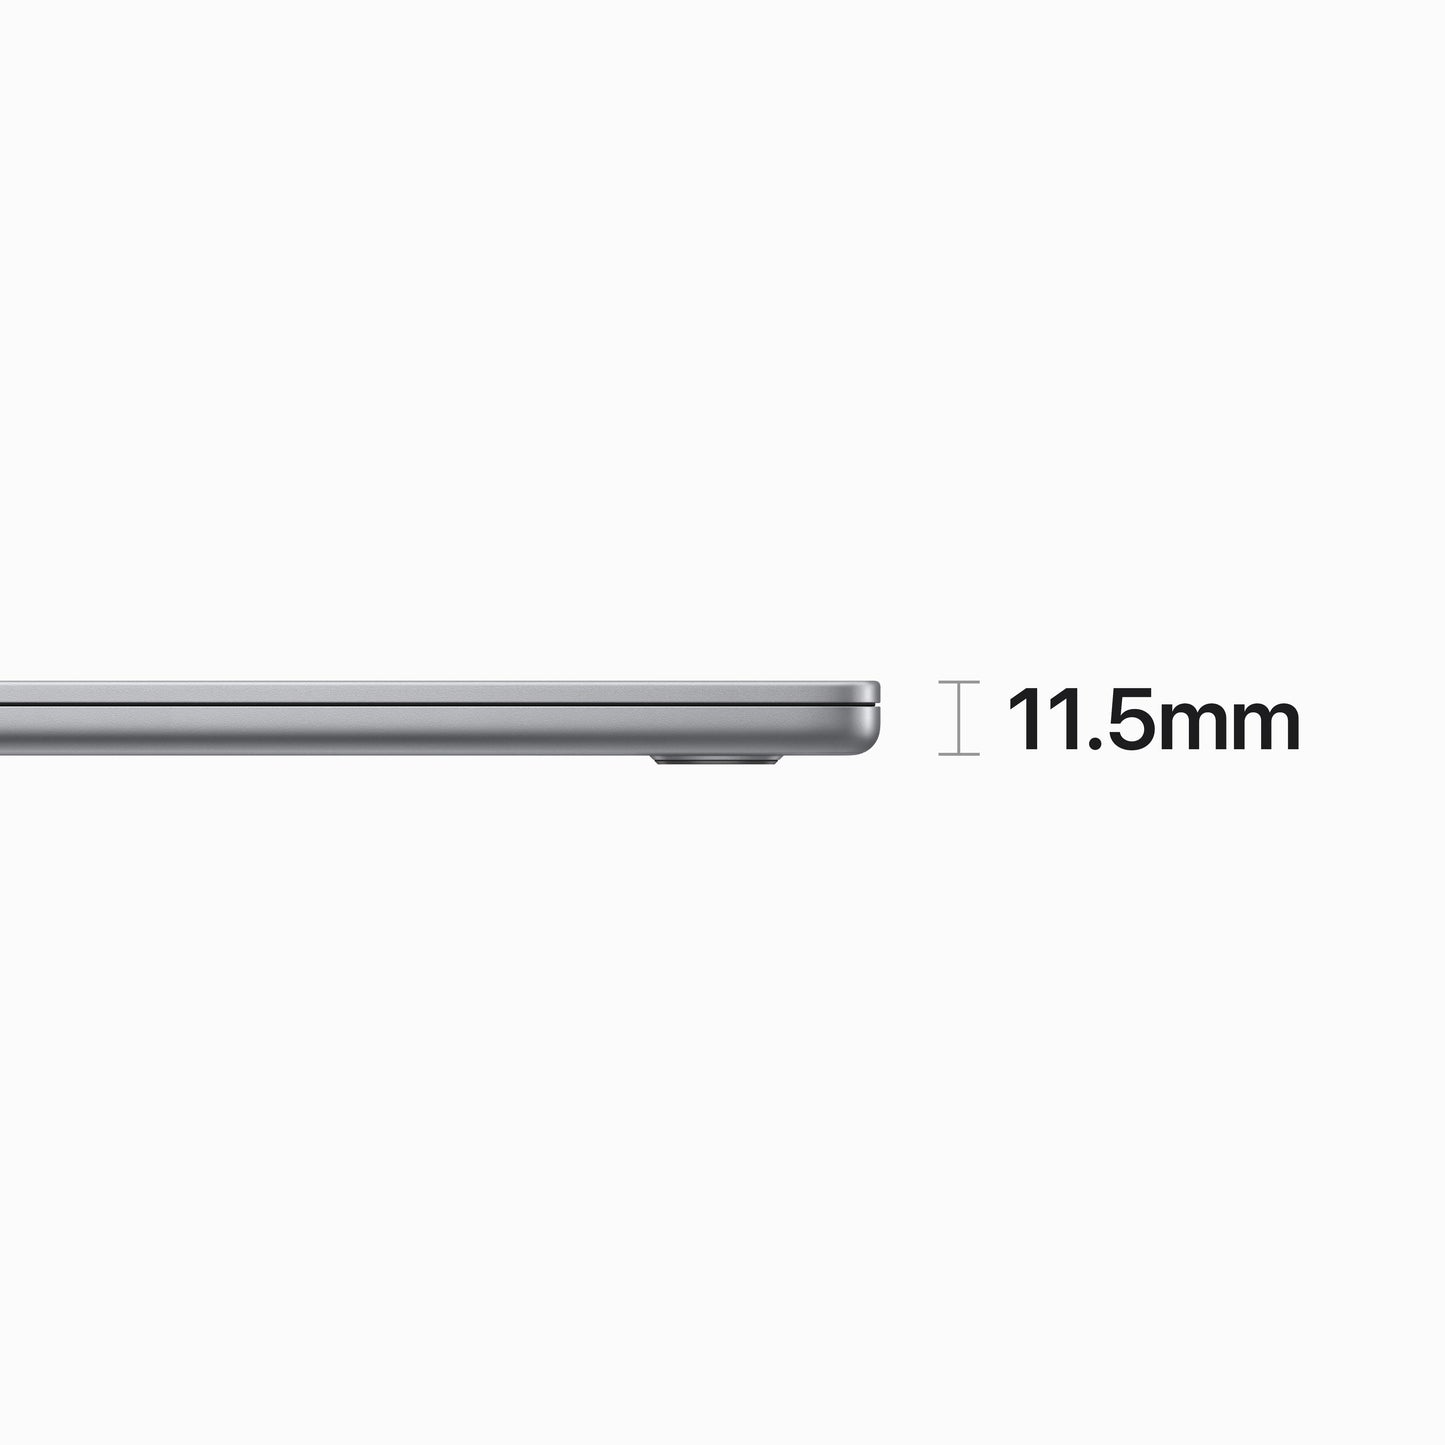 15-inch MacBook Air: Apple M2 chip with 8‑core CPU and 10‑core GPU, 512GB SSD - Space Grey